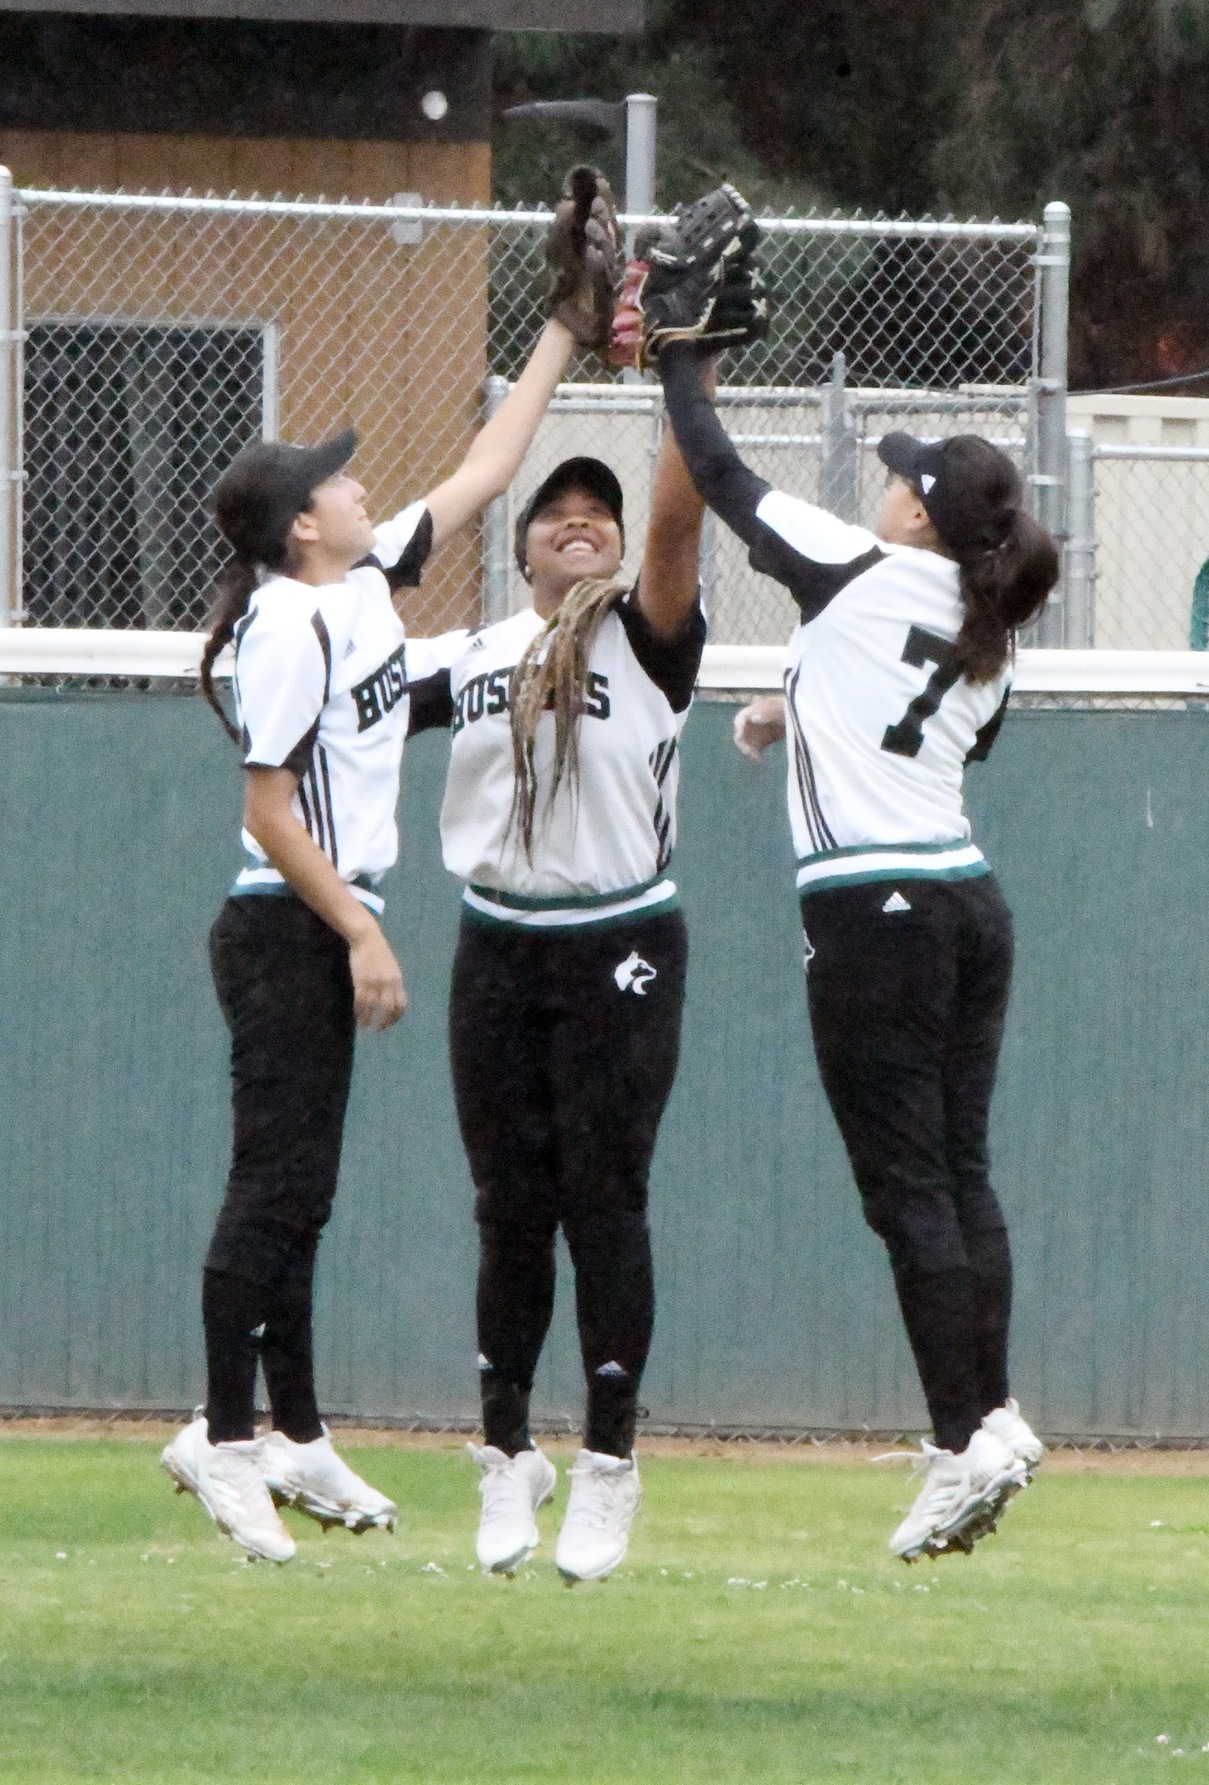 Down 3-1, the East Los Angeles College softball team scored three runs in the 5th inning and two in the 6th to take a 6-4 stunning win against Long Beach City College. (photo by DeeDee Jackson)